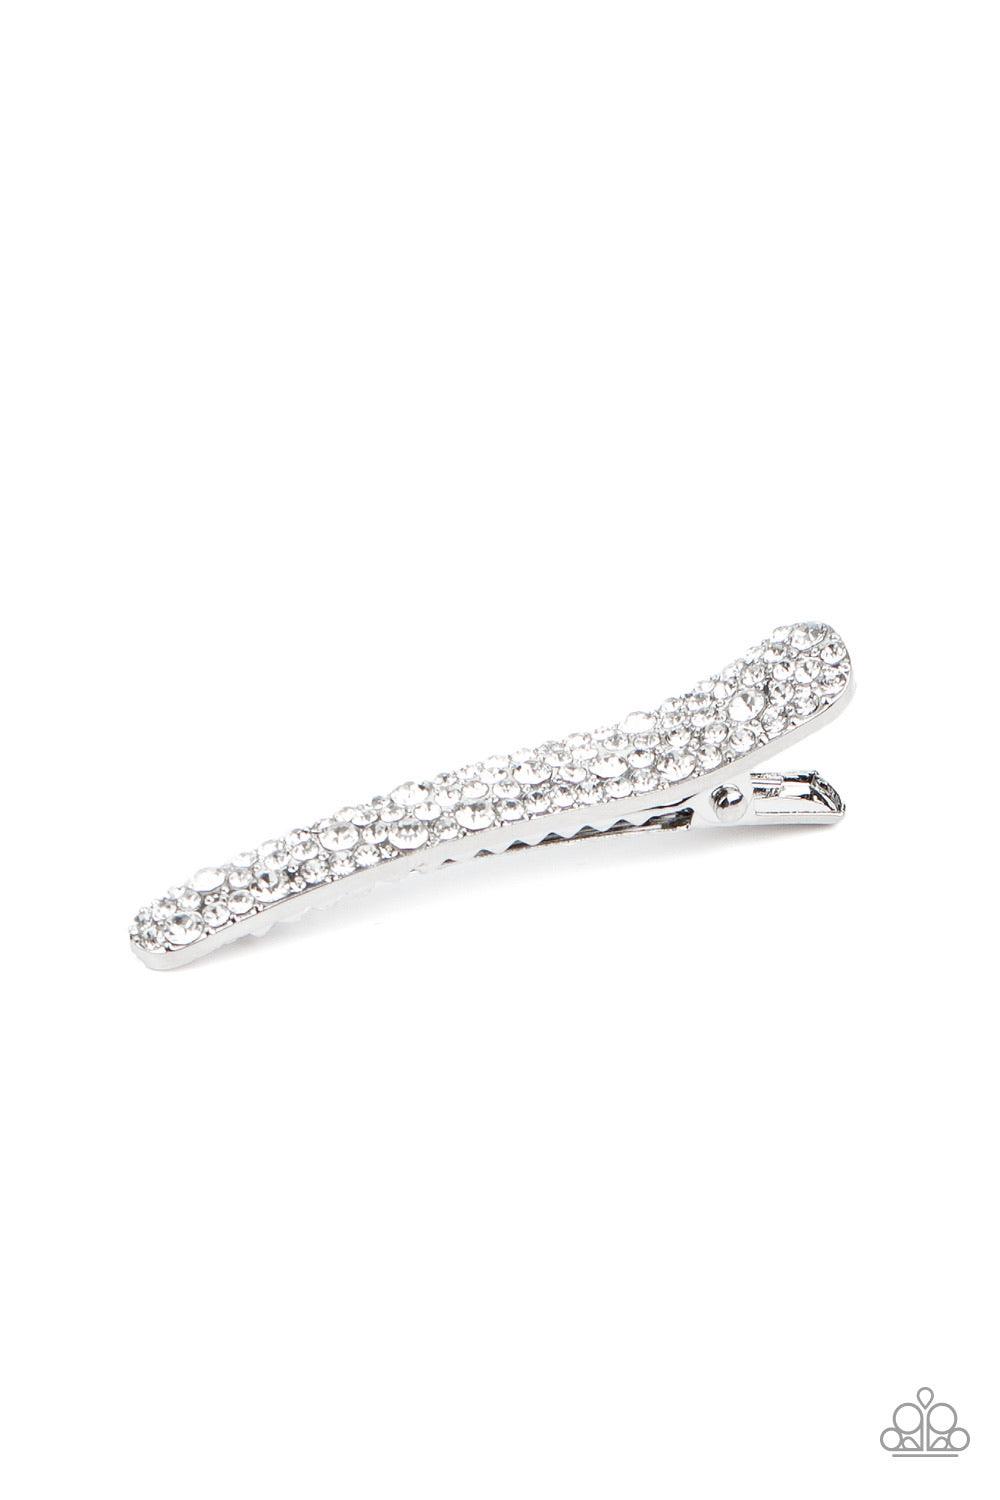 Paparazzi Accessories Wish you were HAIR - White Varying in size, dainty white rhinestones adorn the front of a glistening silver frame for a timeless look. Features a standard hair clip. Sold as one individual hair clip. Hair Accessories